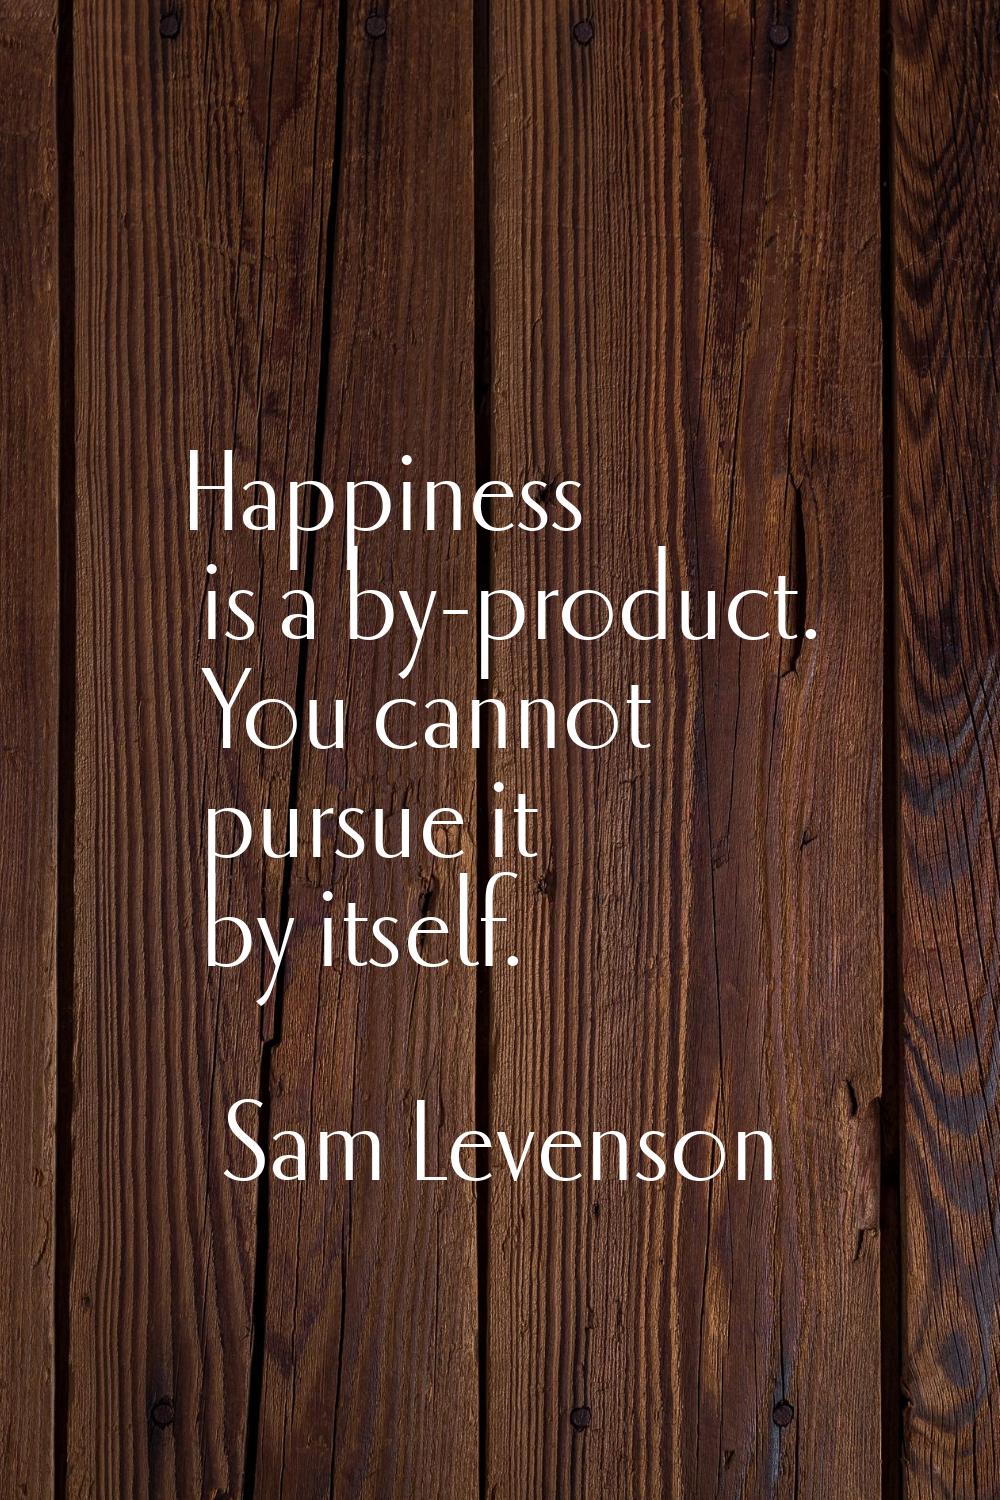 Happiness is a by-product. You cannot pursue it by itself.